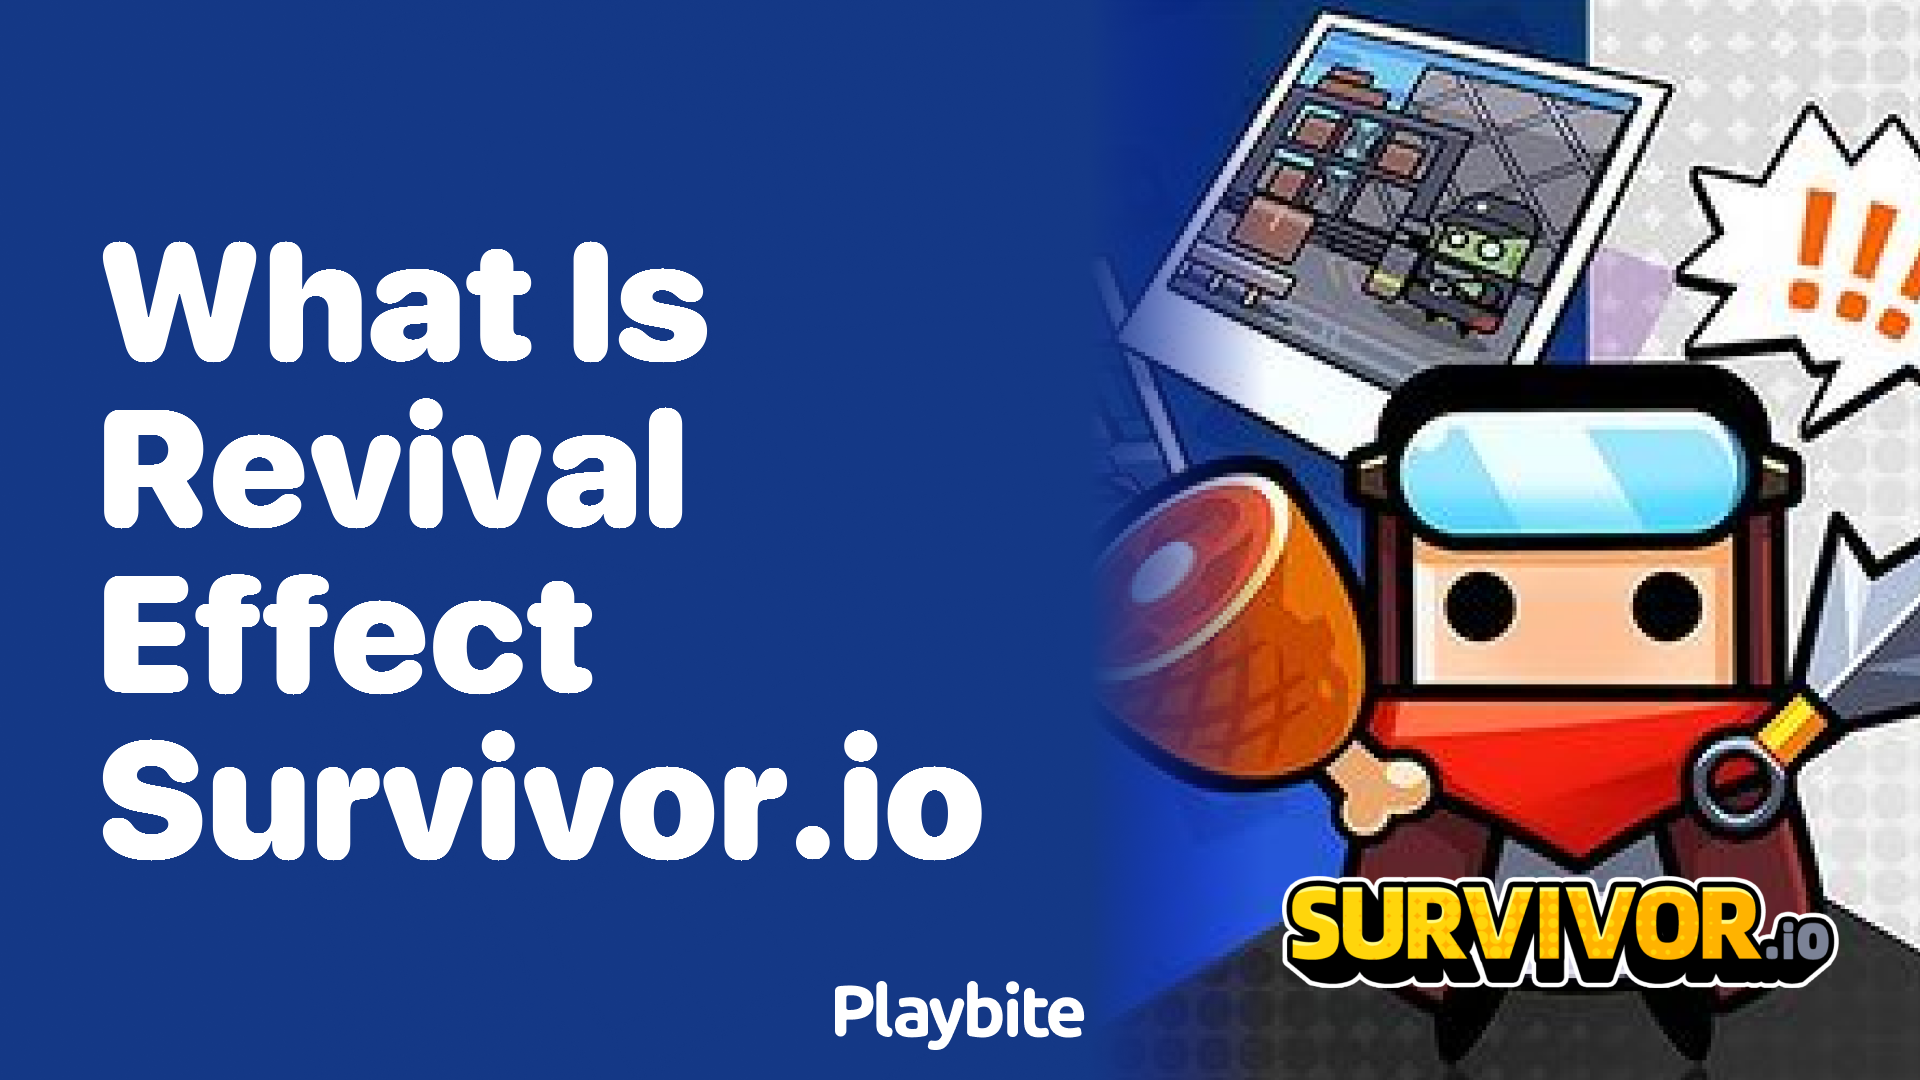 What Is the Revival Effect in Survivor.io?